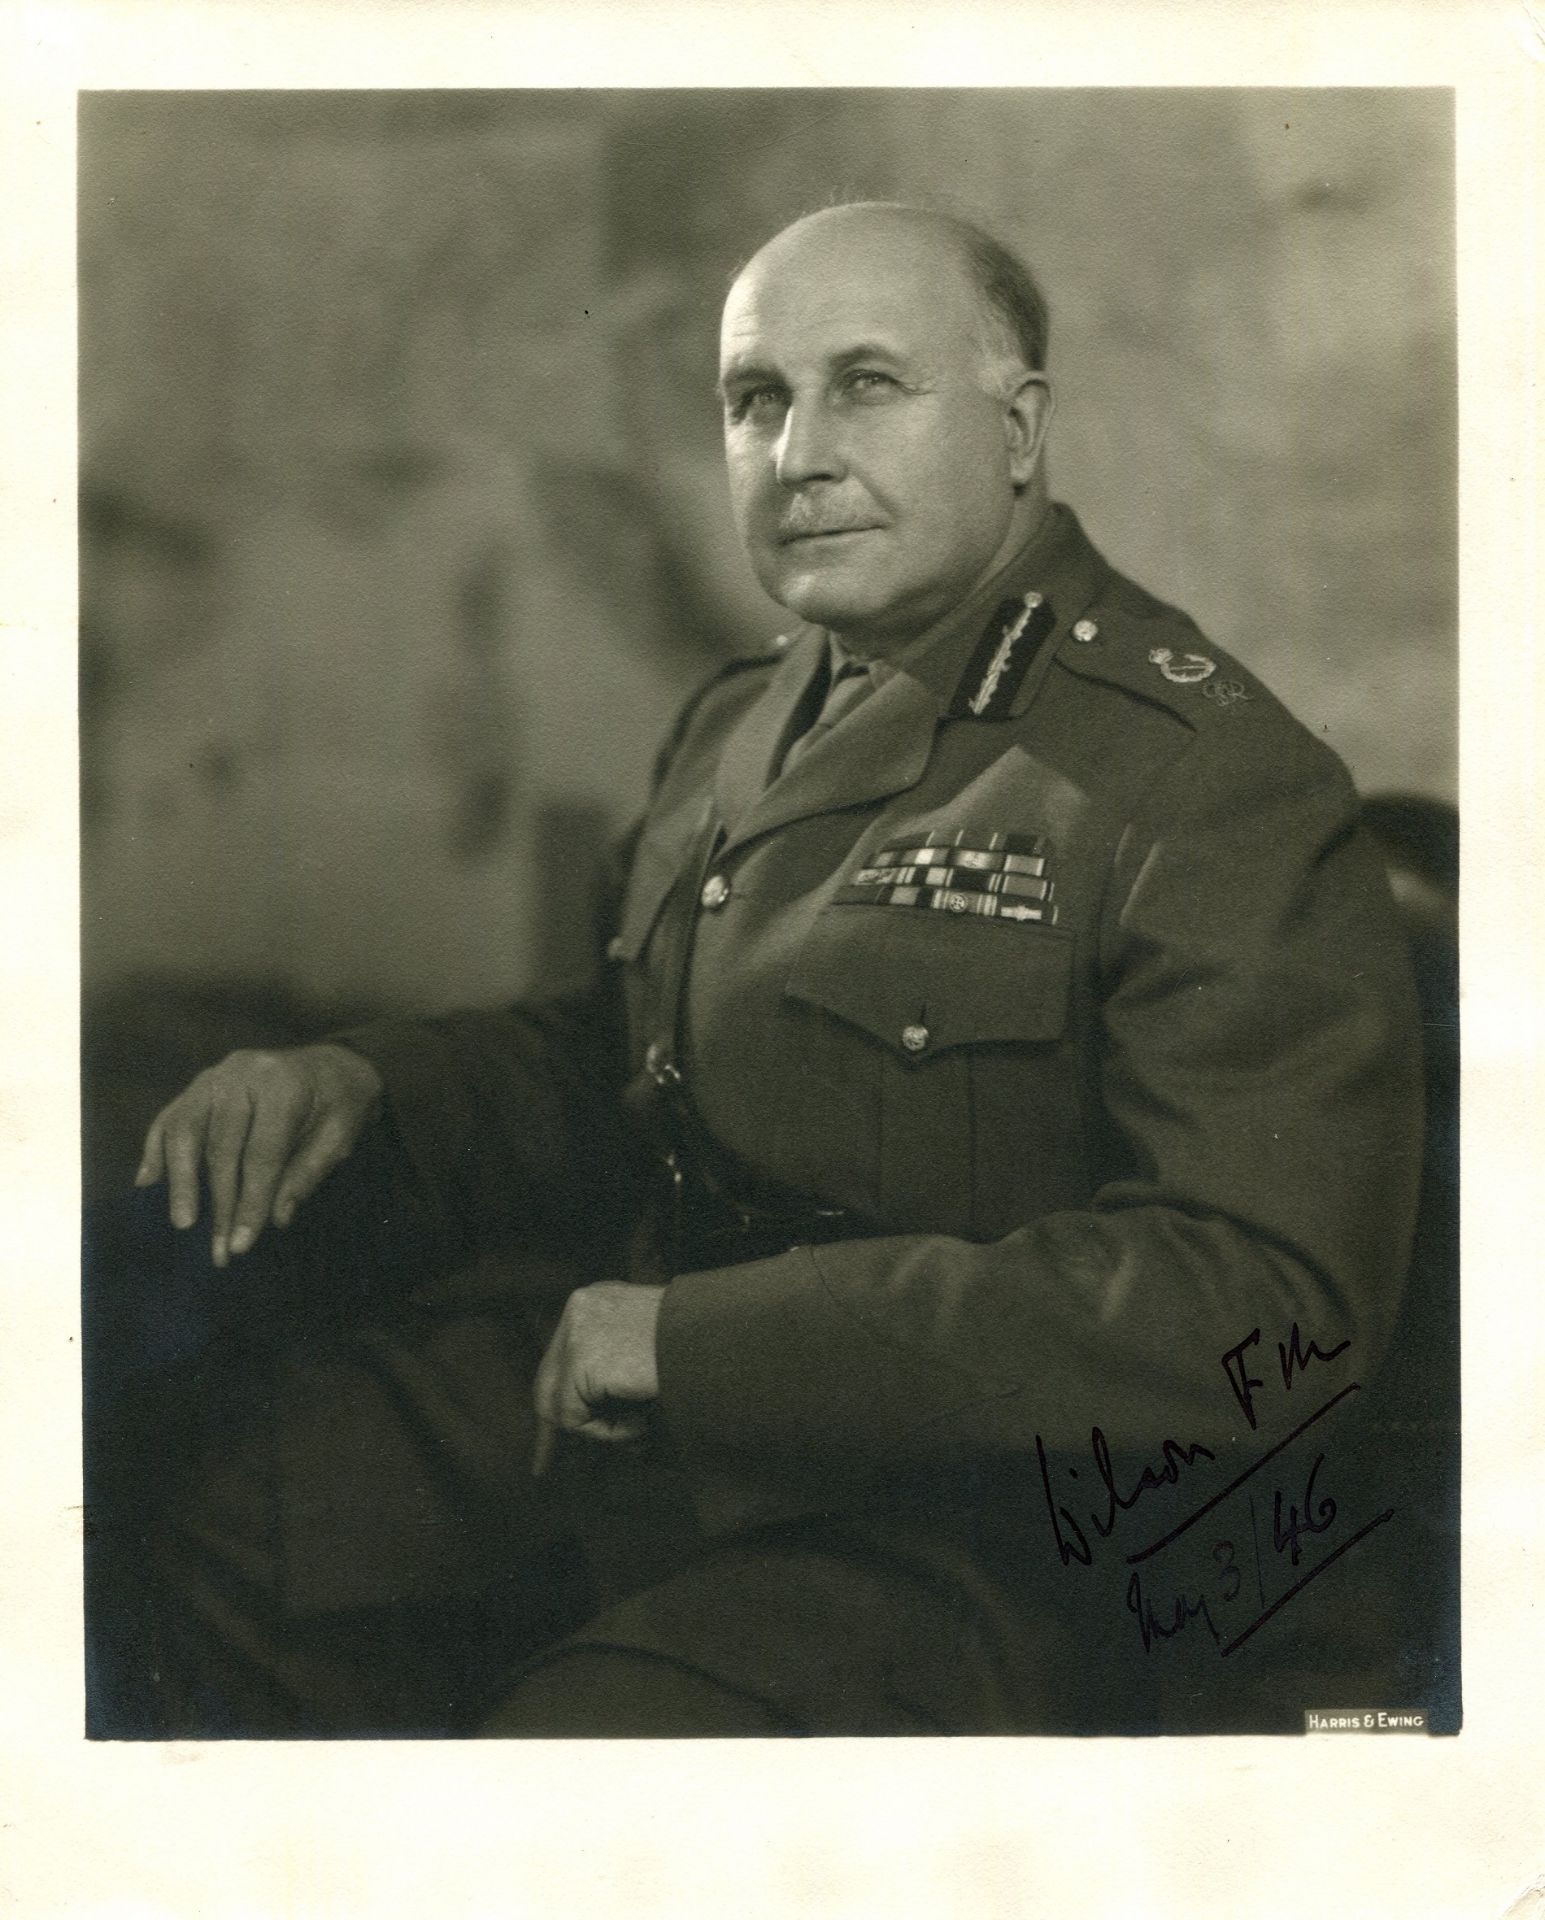 WILSON HENRY: (1881-1964) British Field Marshal who served as General Officer Commanding-in-Chief